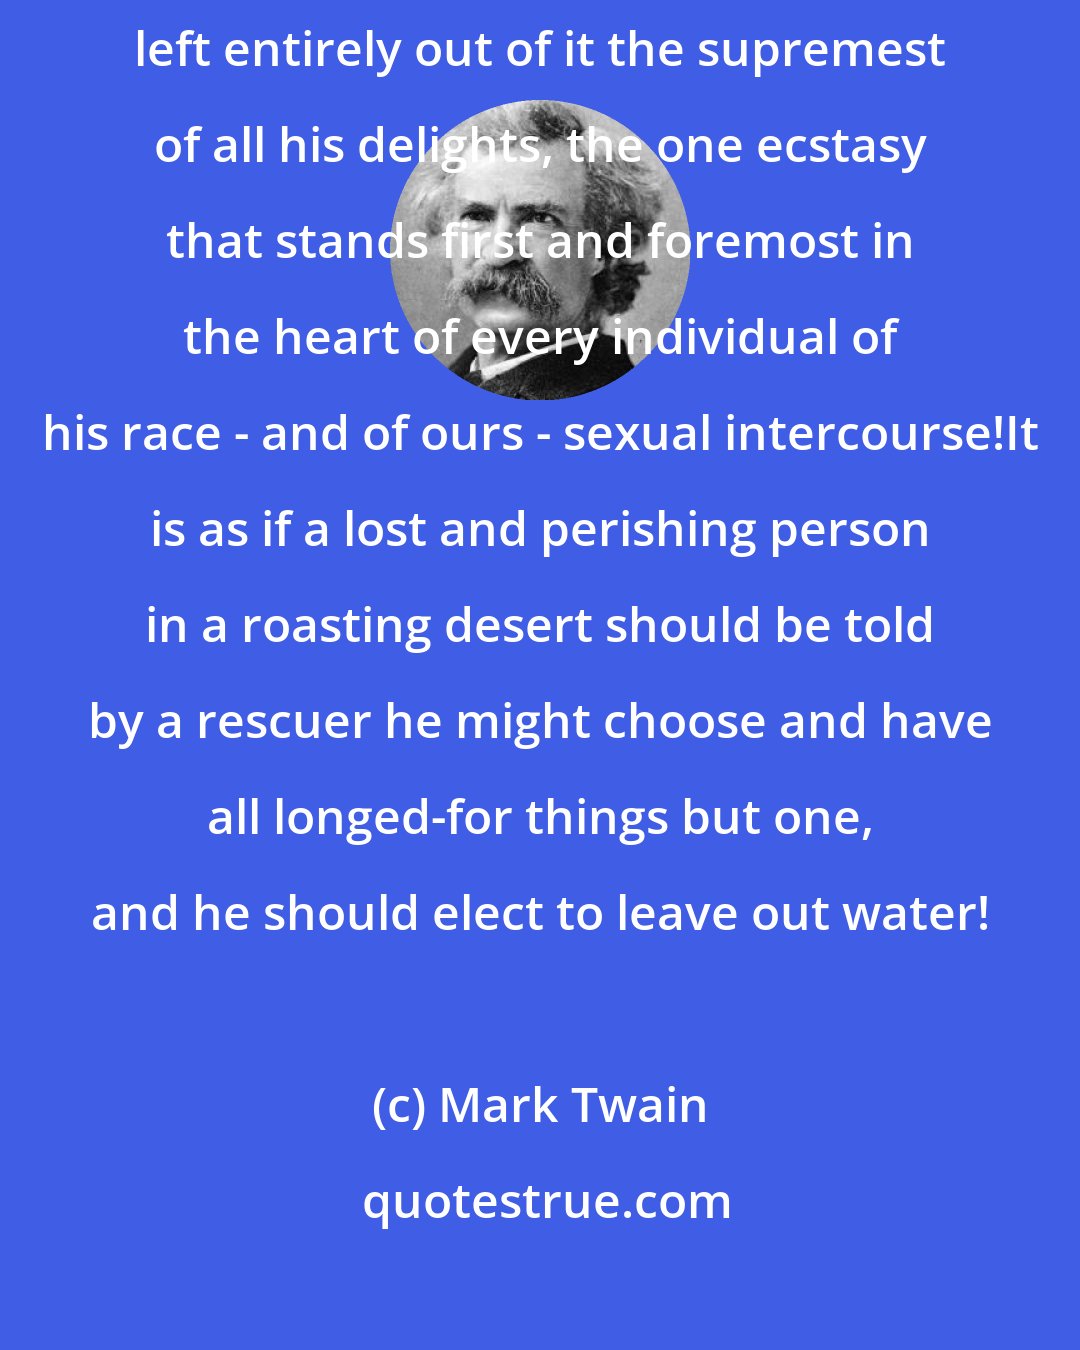 Mark Twain: For instance, take this sample: he has imagined a heaven, and has left entirely out of it the supremest of all his delights, the one ecstasy that stands first and foremost in the heart of every individual of his race - and of ours - sexual intercourse!It is as if a lost and perishing person in a roasting desert should be told by a rescuer he might choose and have all longed-for things but one, and he should elect to leave out water!